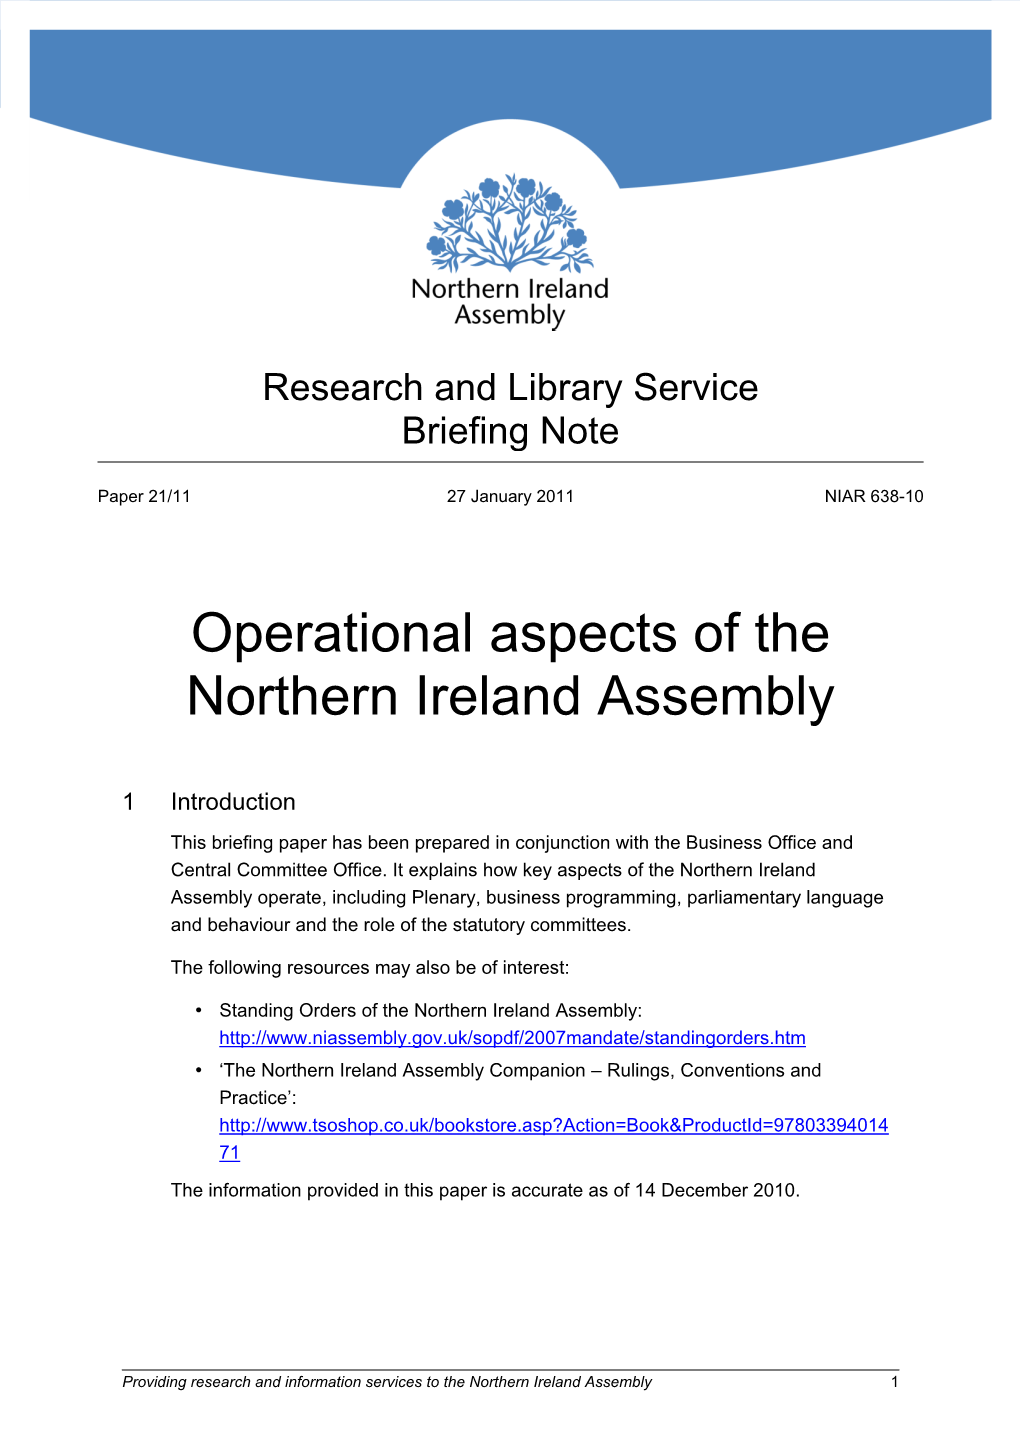 Operational Aspects of the Northern Ireland Assembly